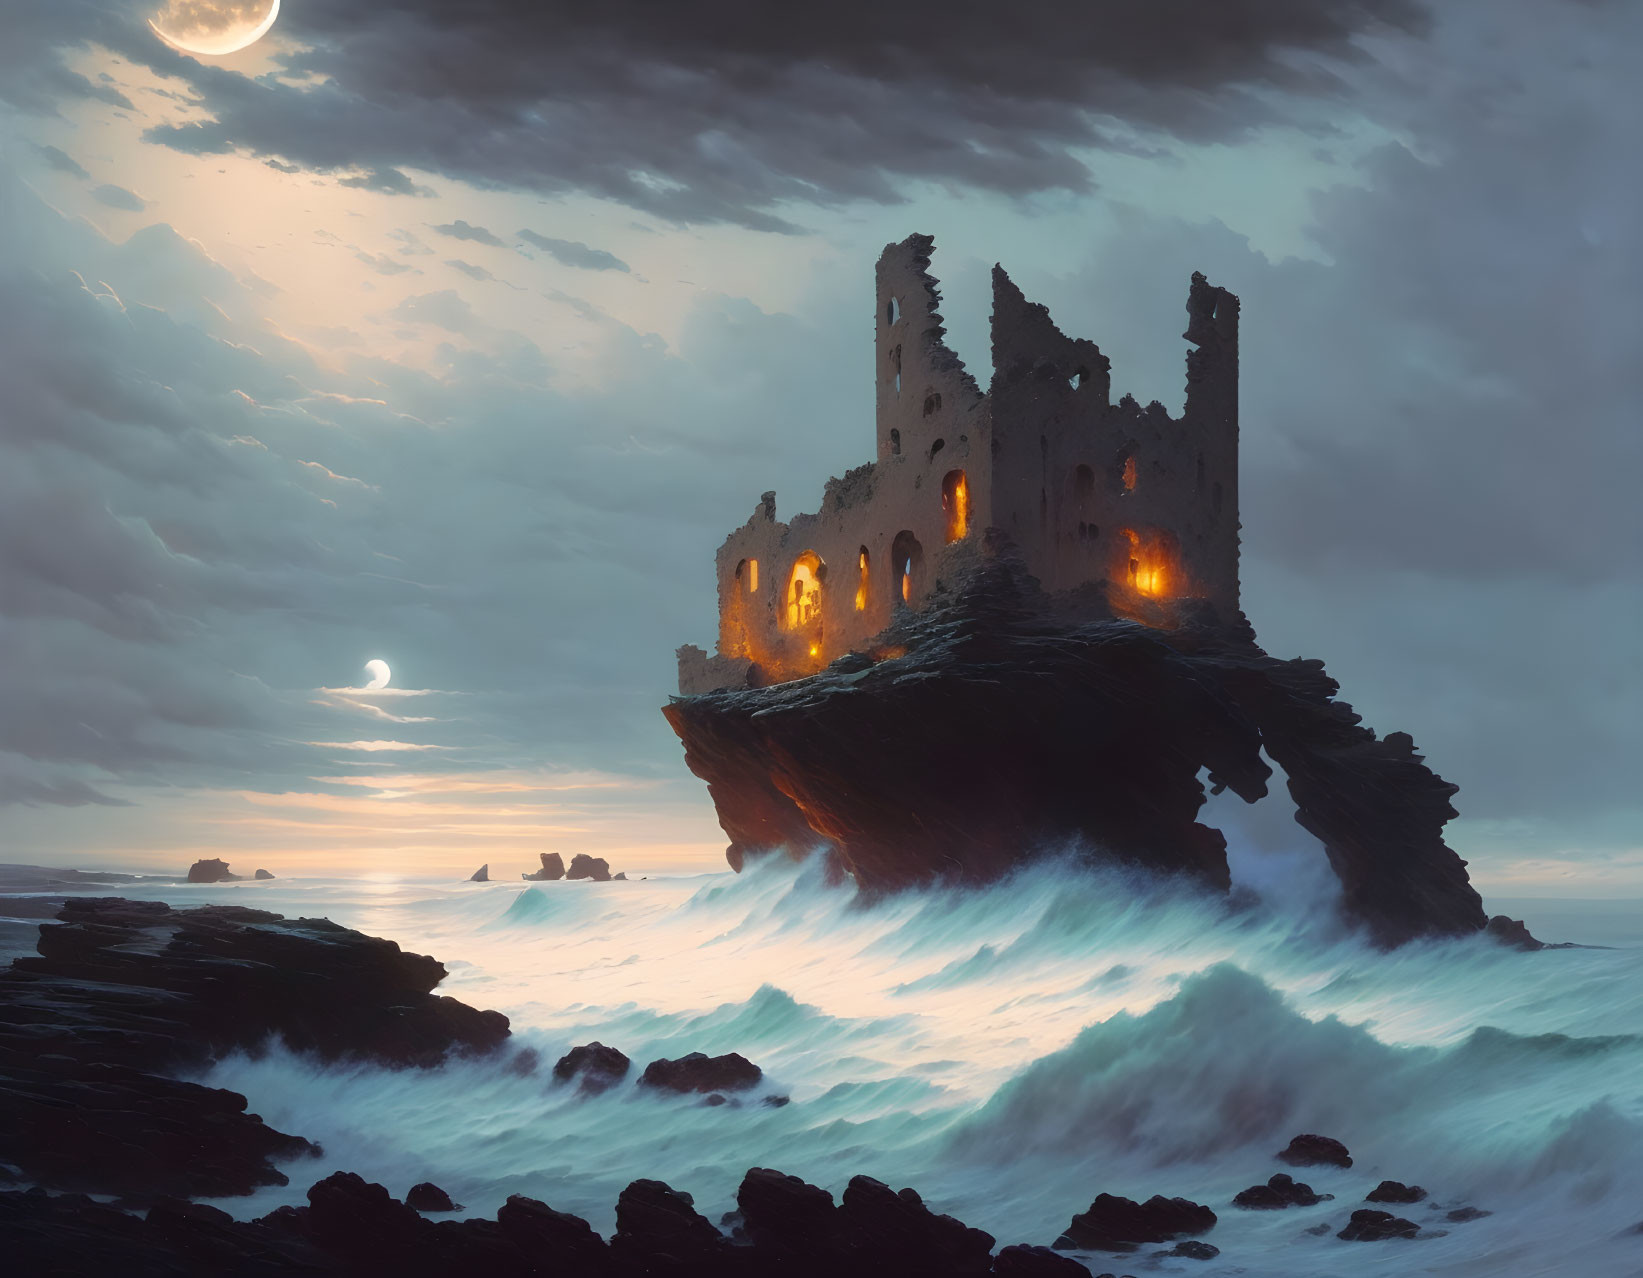 Ruined castle on cliff with crashing waves under twilight sky and multiple moon phases.